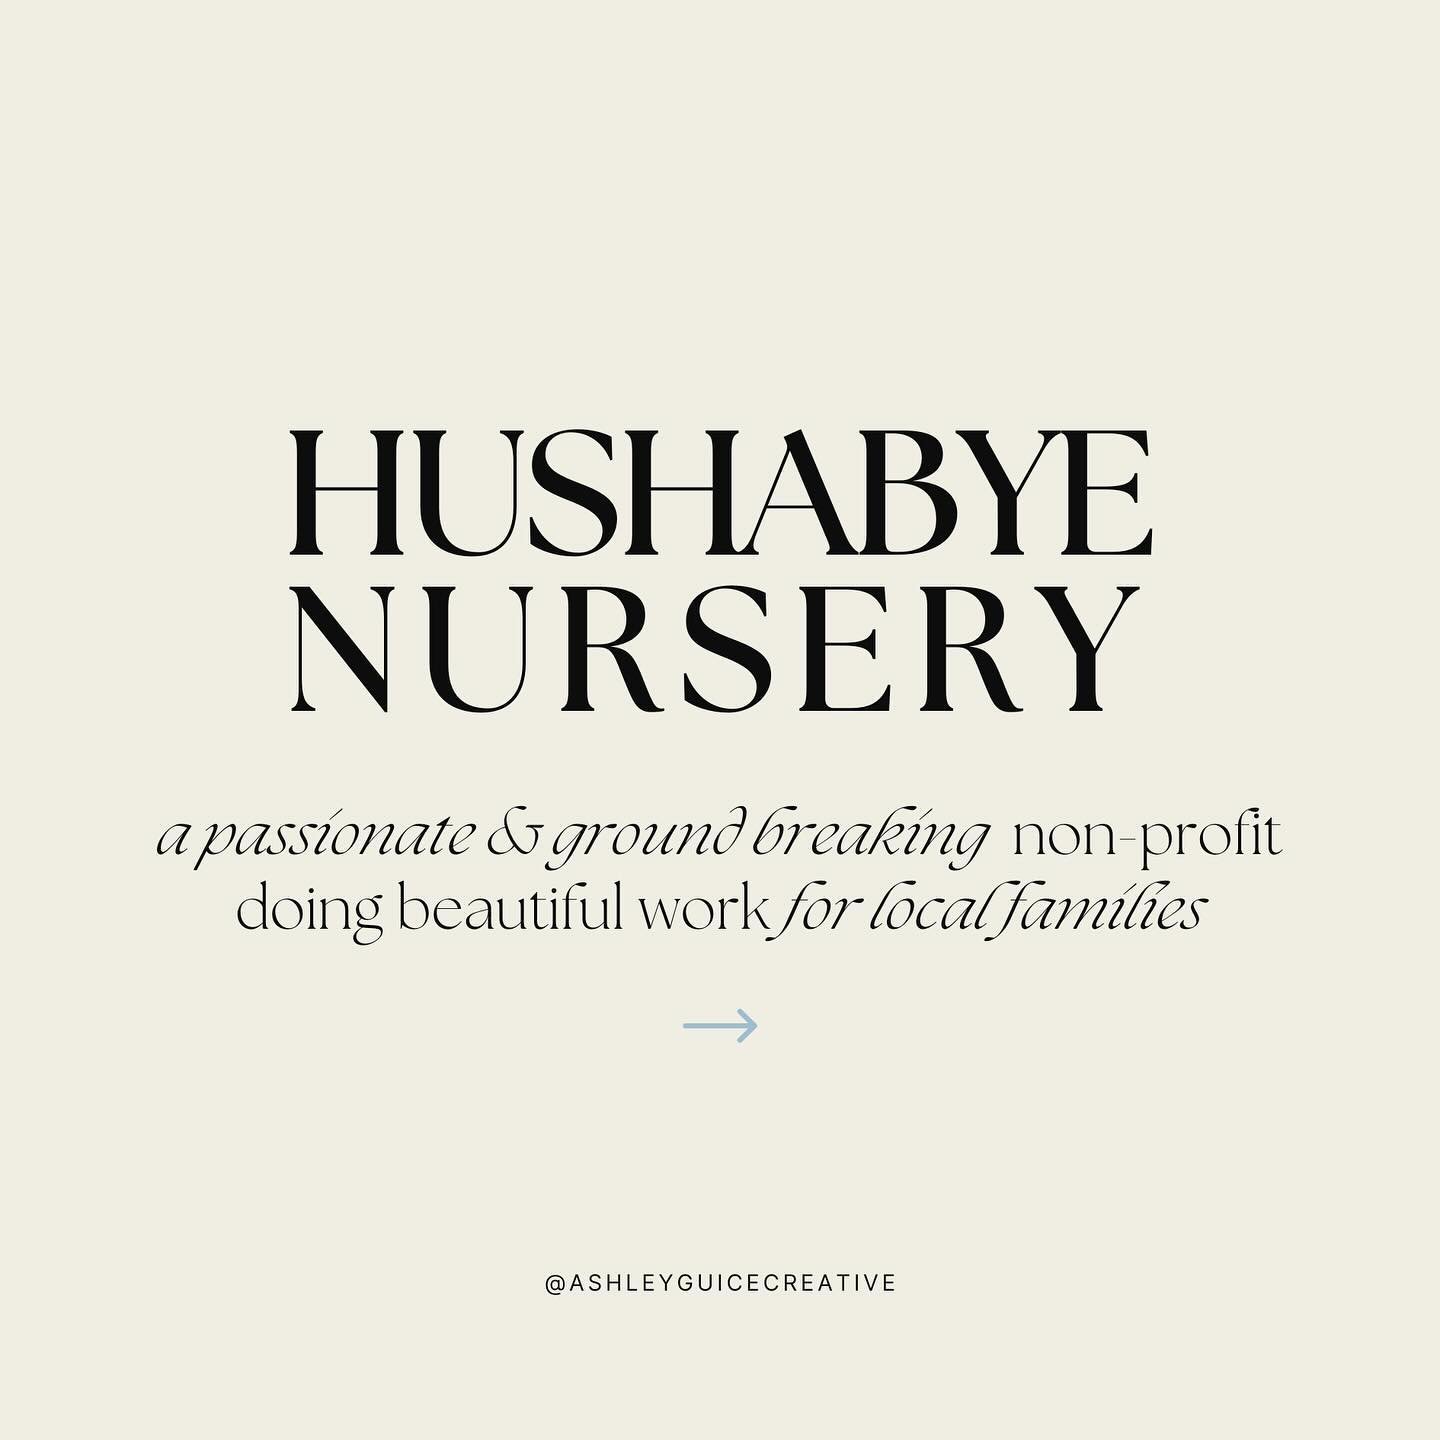 We&rsquo;re proud to support Hushabye Nursery @hushabye.nursery , a non-profit dedicated to helping infants born with Neonatal Abstinence Syndrome (NAS). 

Hushabye Nursery&rsquo;s mission is to &lsquo;embrace substance exposed babies and their careg